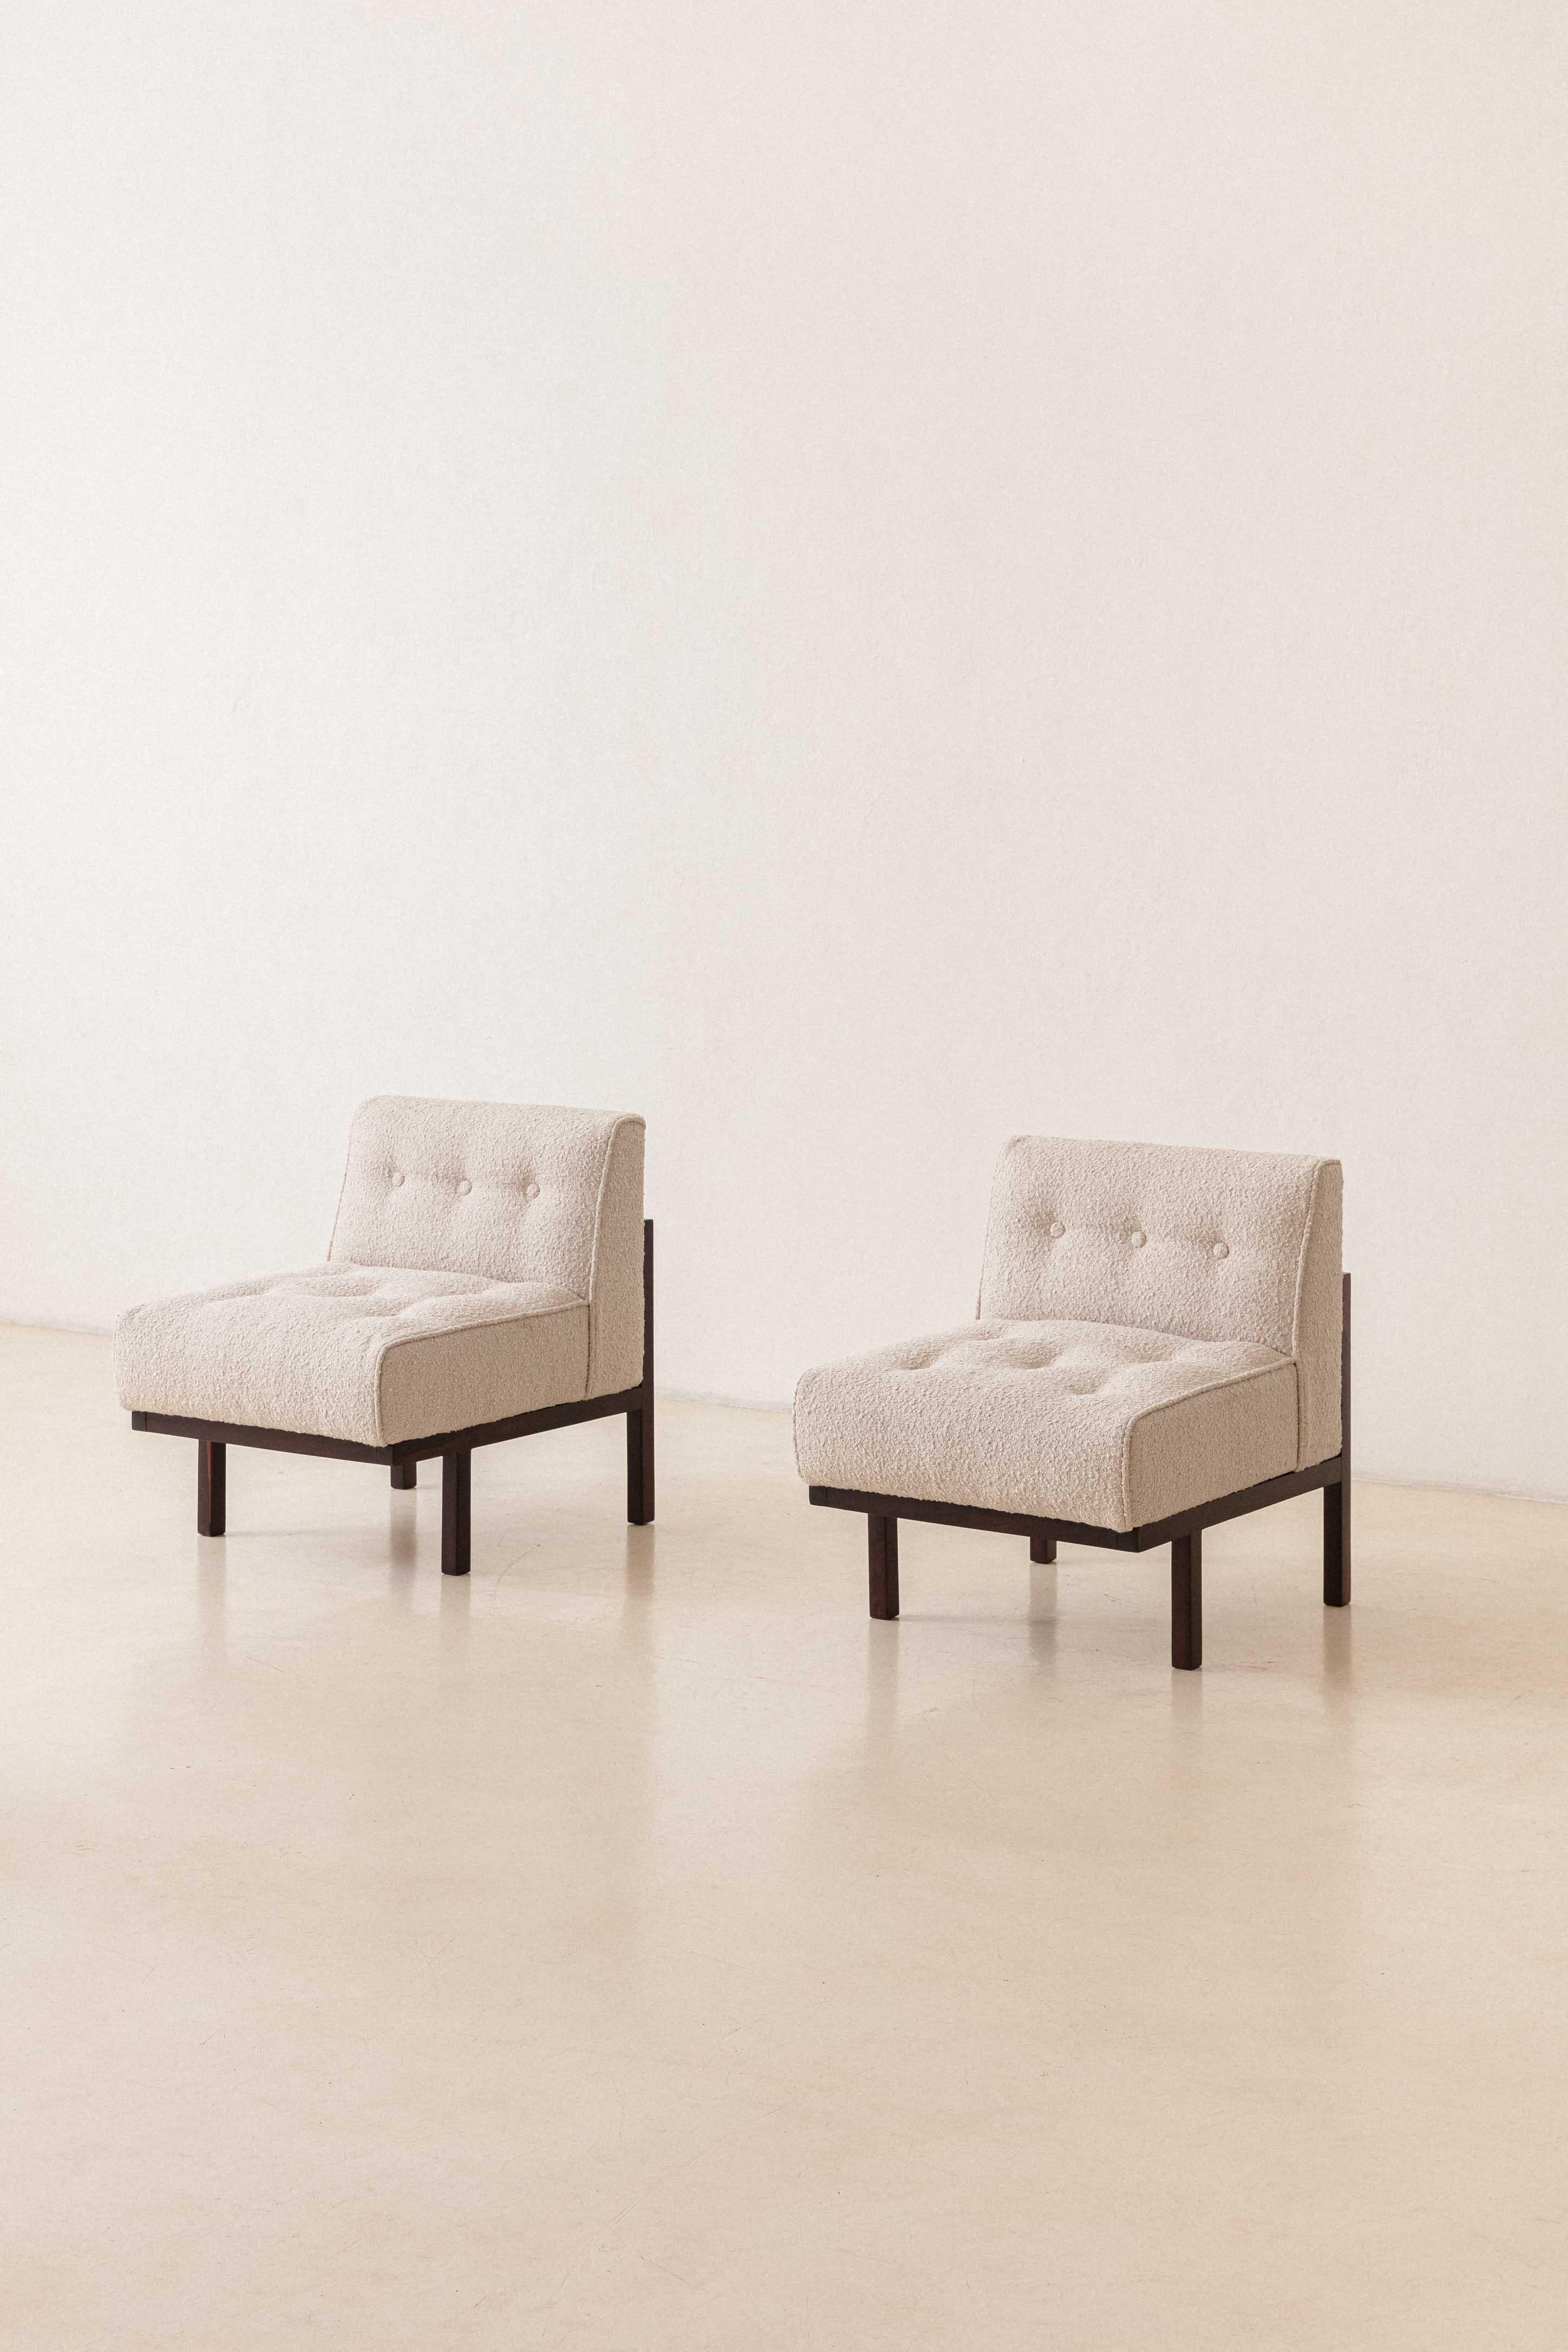 Mid-Century Modern Pair of M1 Armchairs by Brazilian Company Branco & Preto, Midcentury, 1952 For Sale